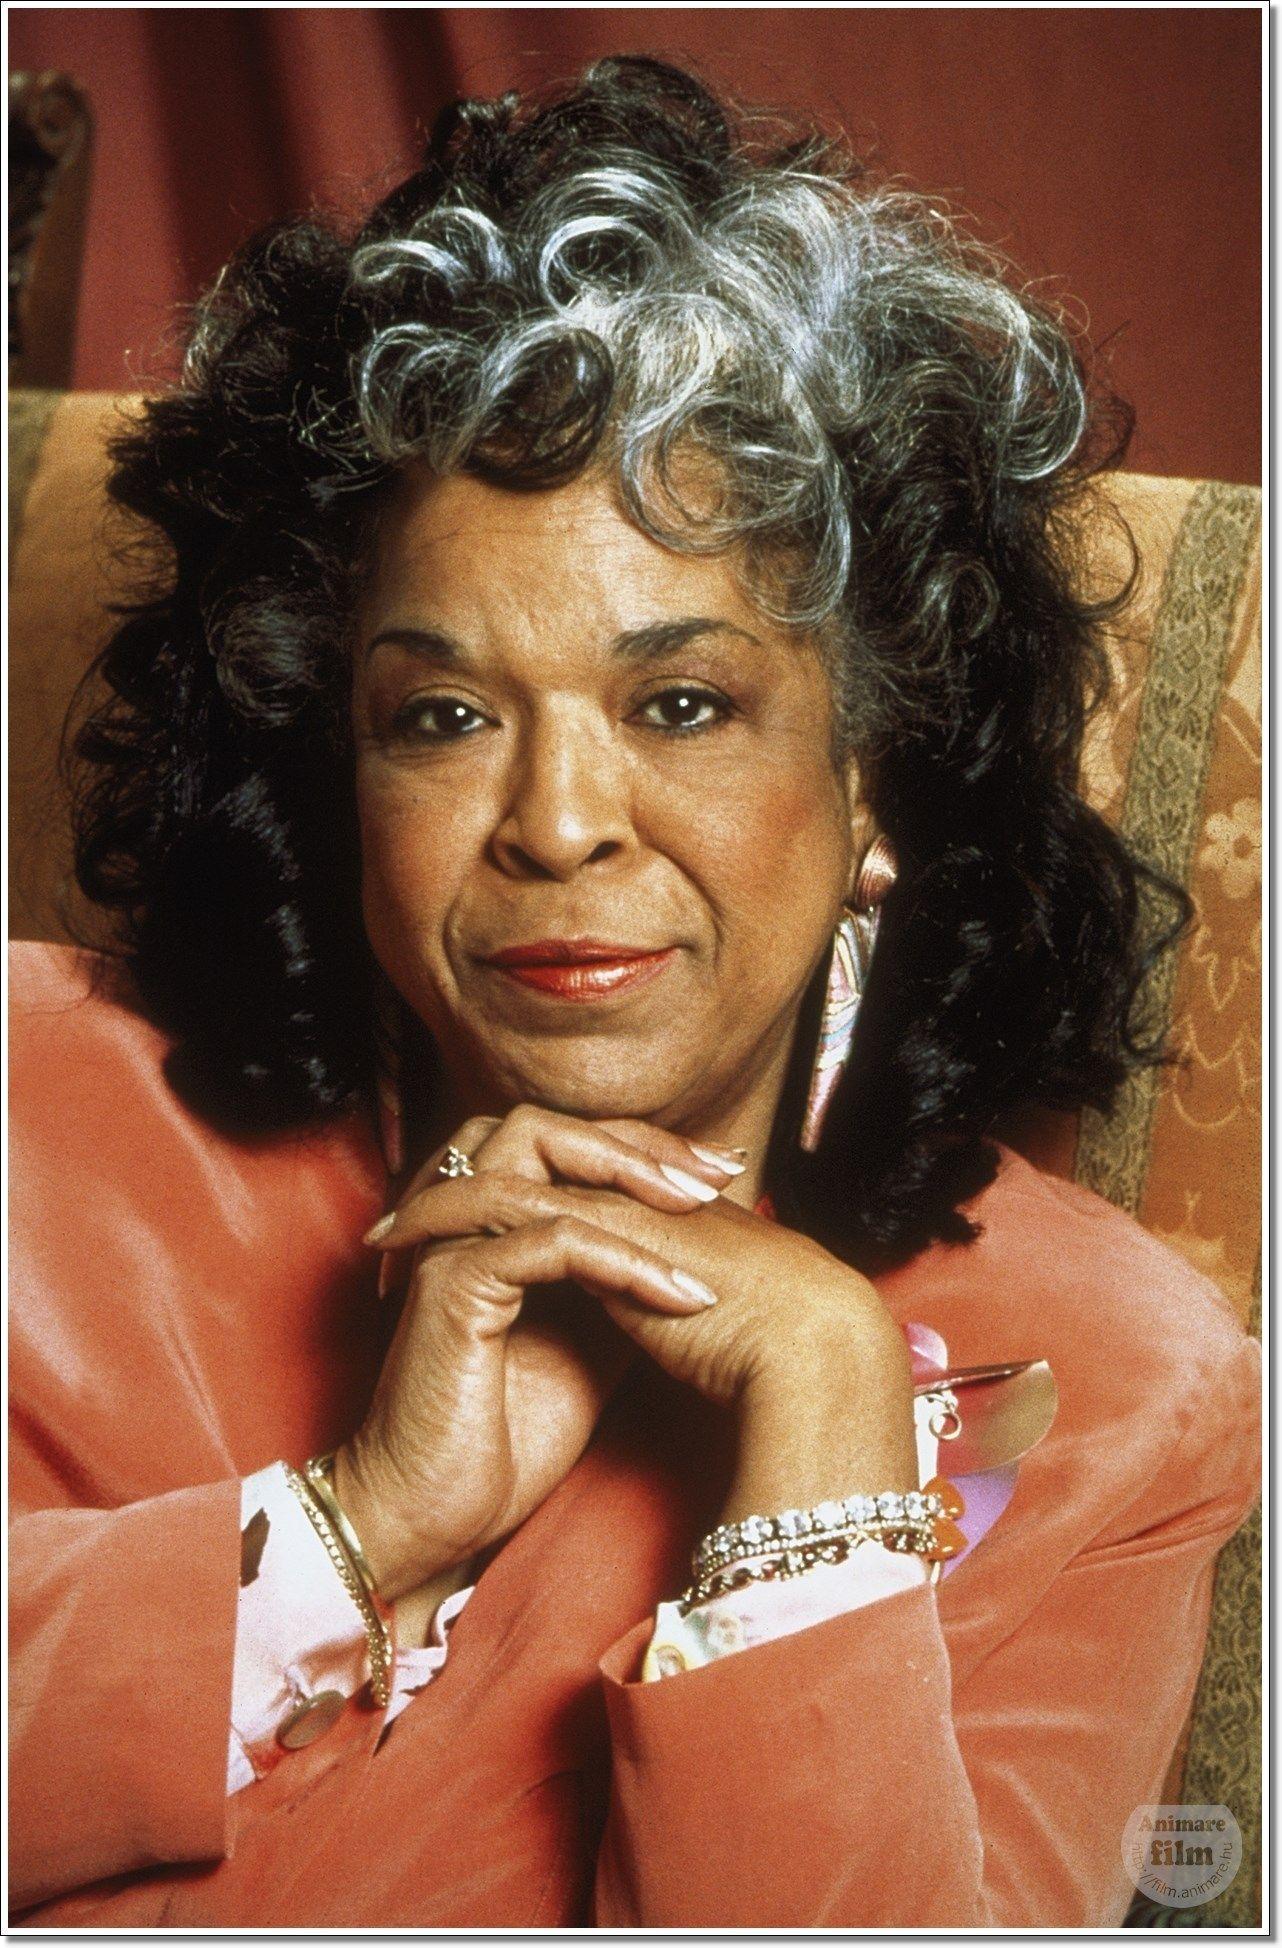 Della Reese. Known people people news and biographies